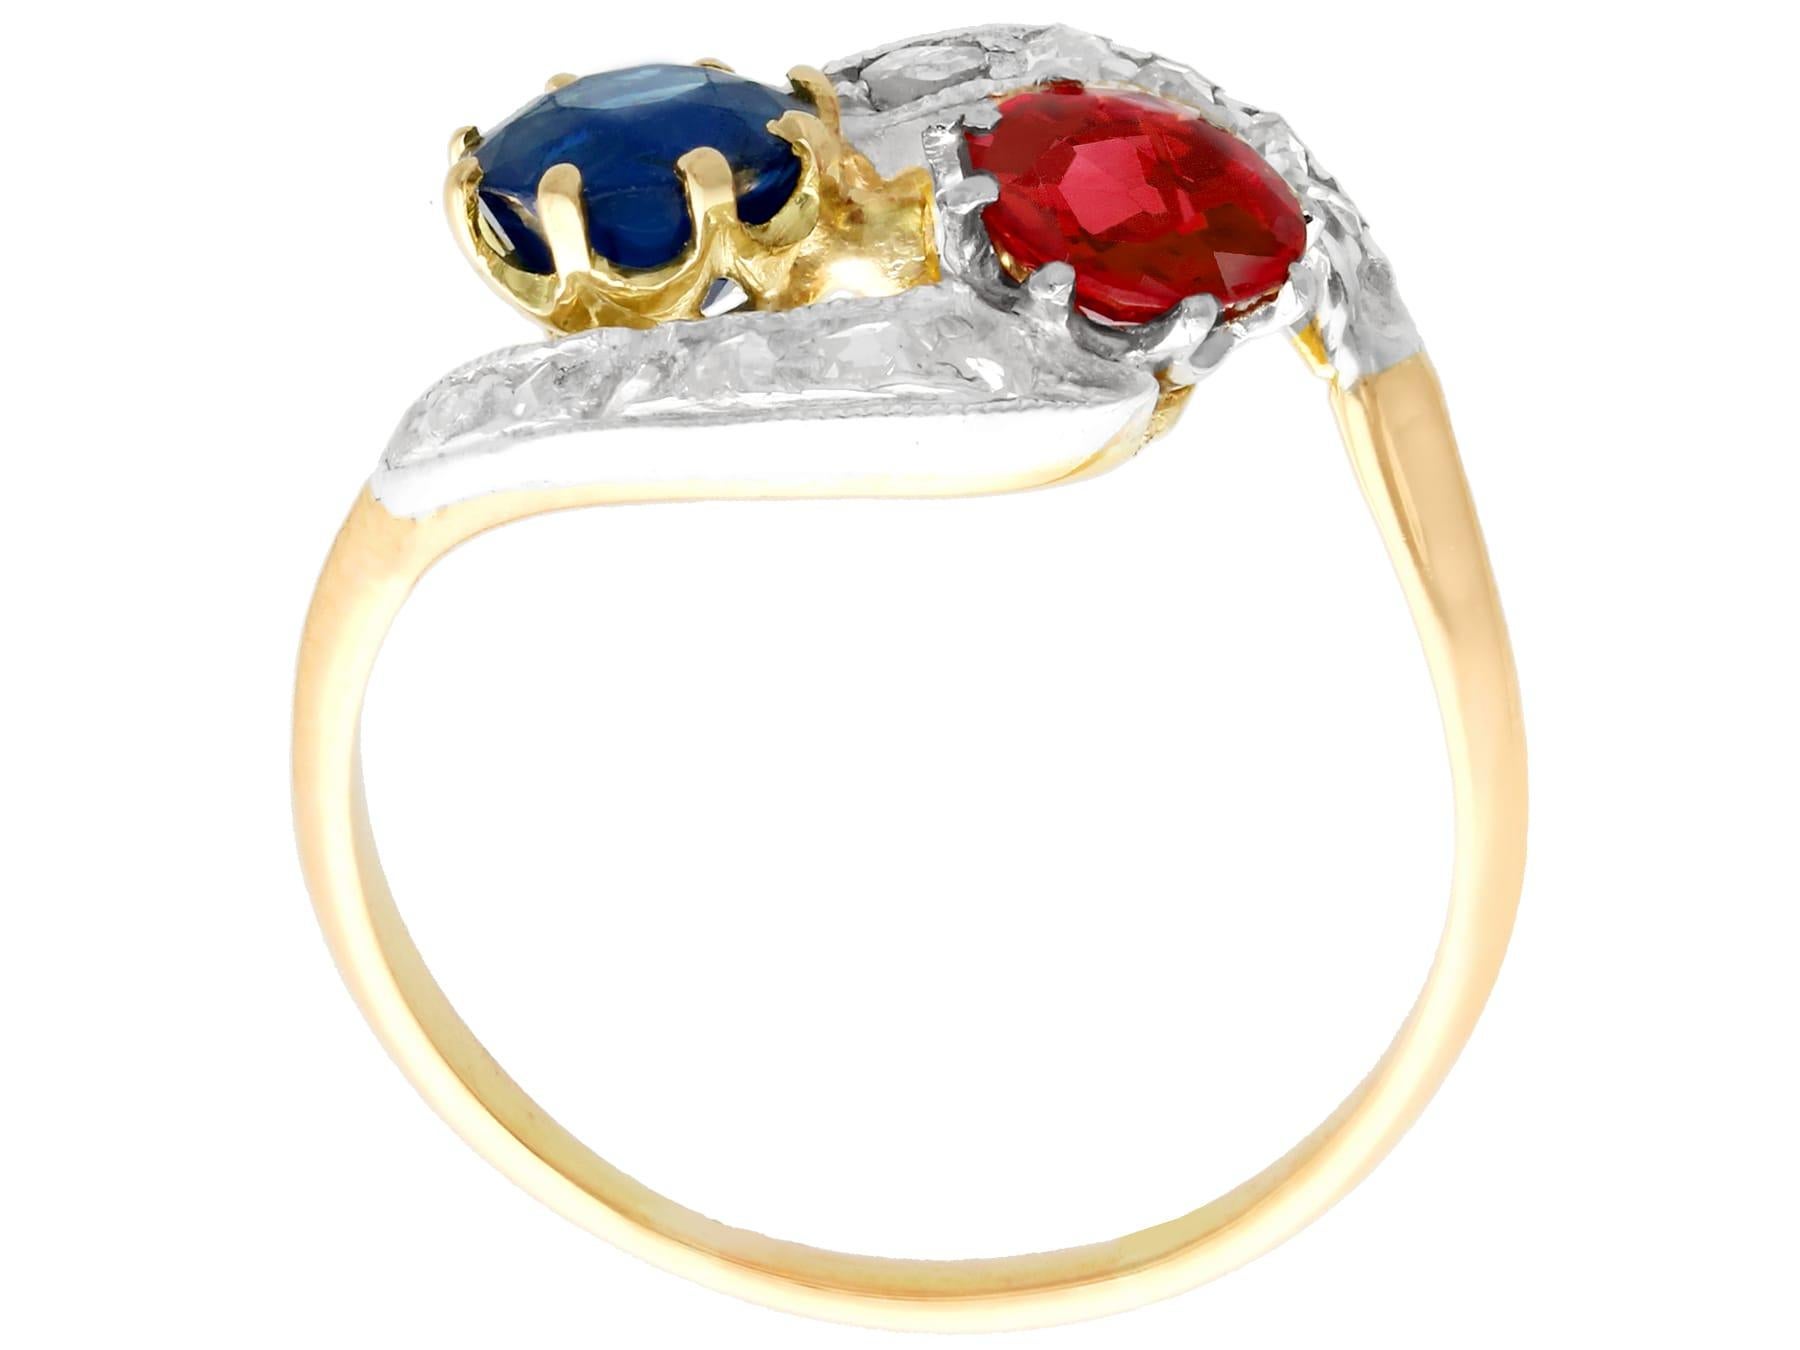 Antique Red Spinel and 1.02 Carat Sapphire Yellow Gold Twist Engagement Ring In Excellent Condition For Sale In Jesmond, Newcastle Upon Tyne